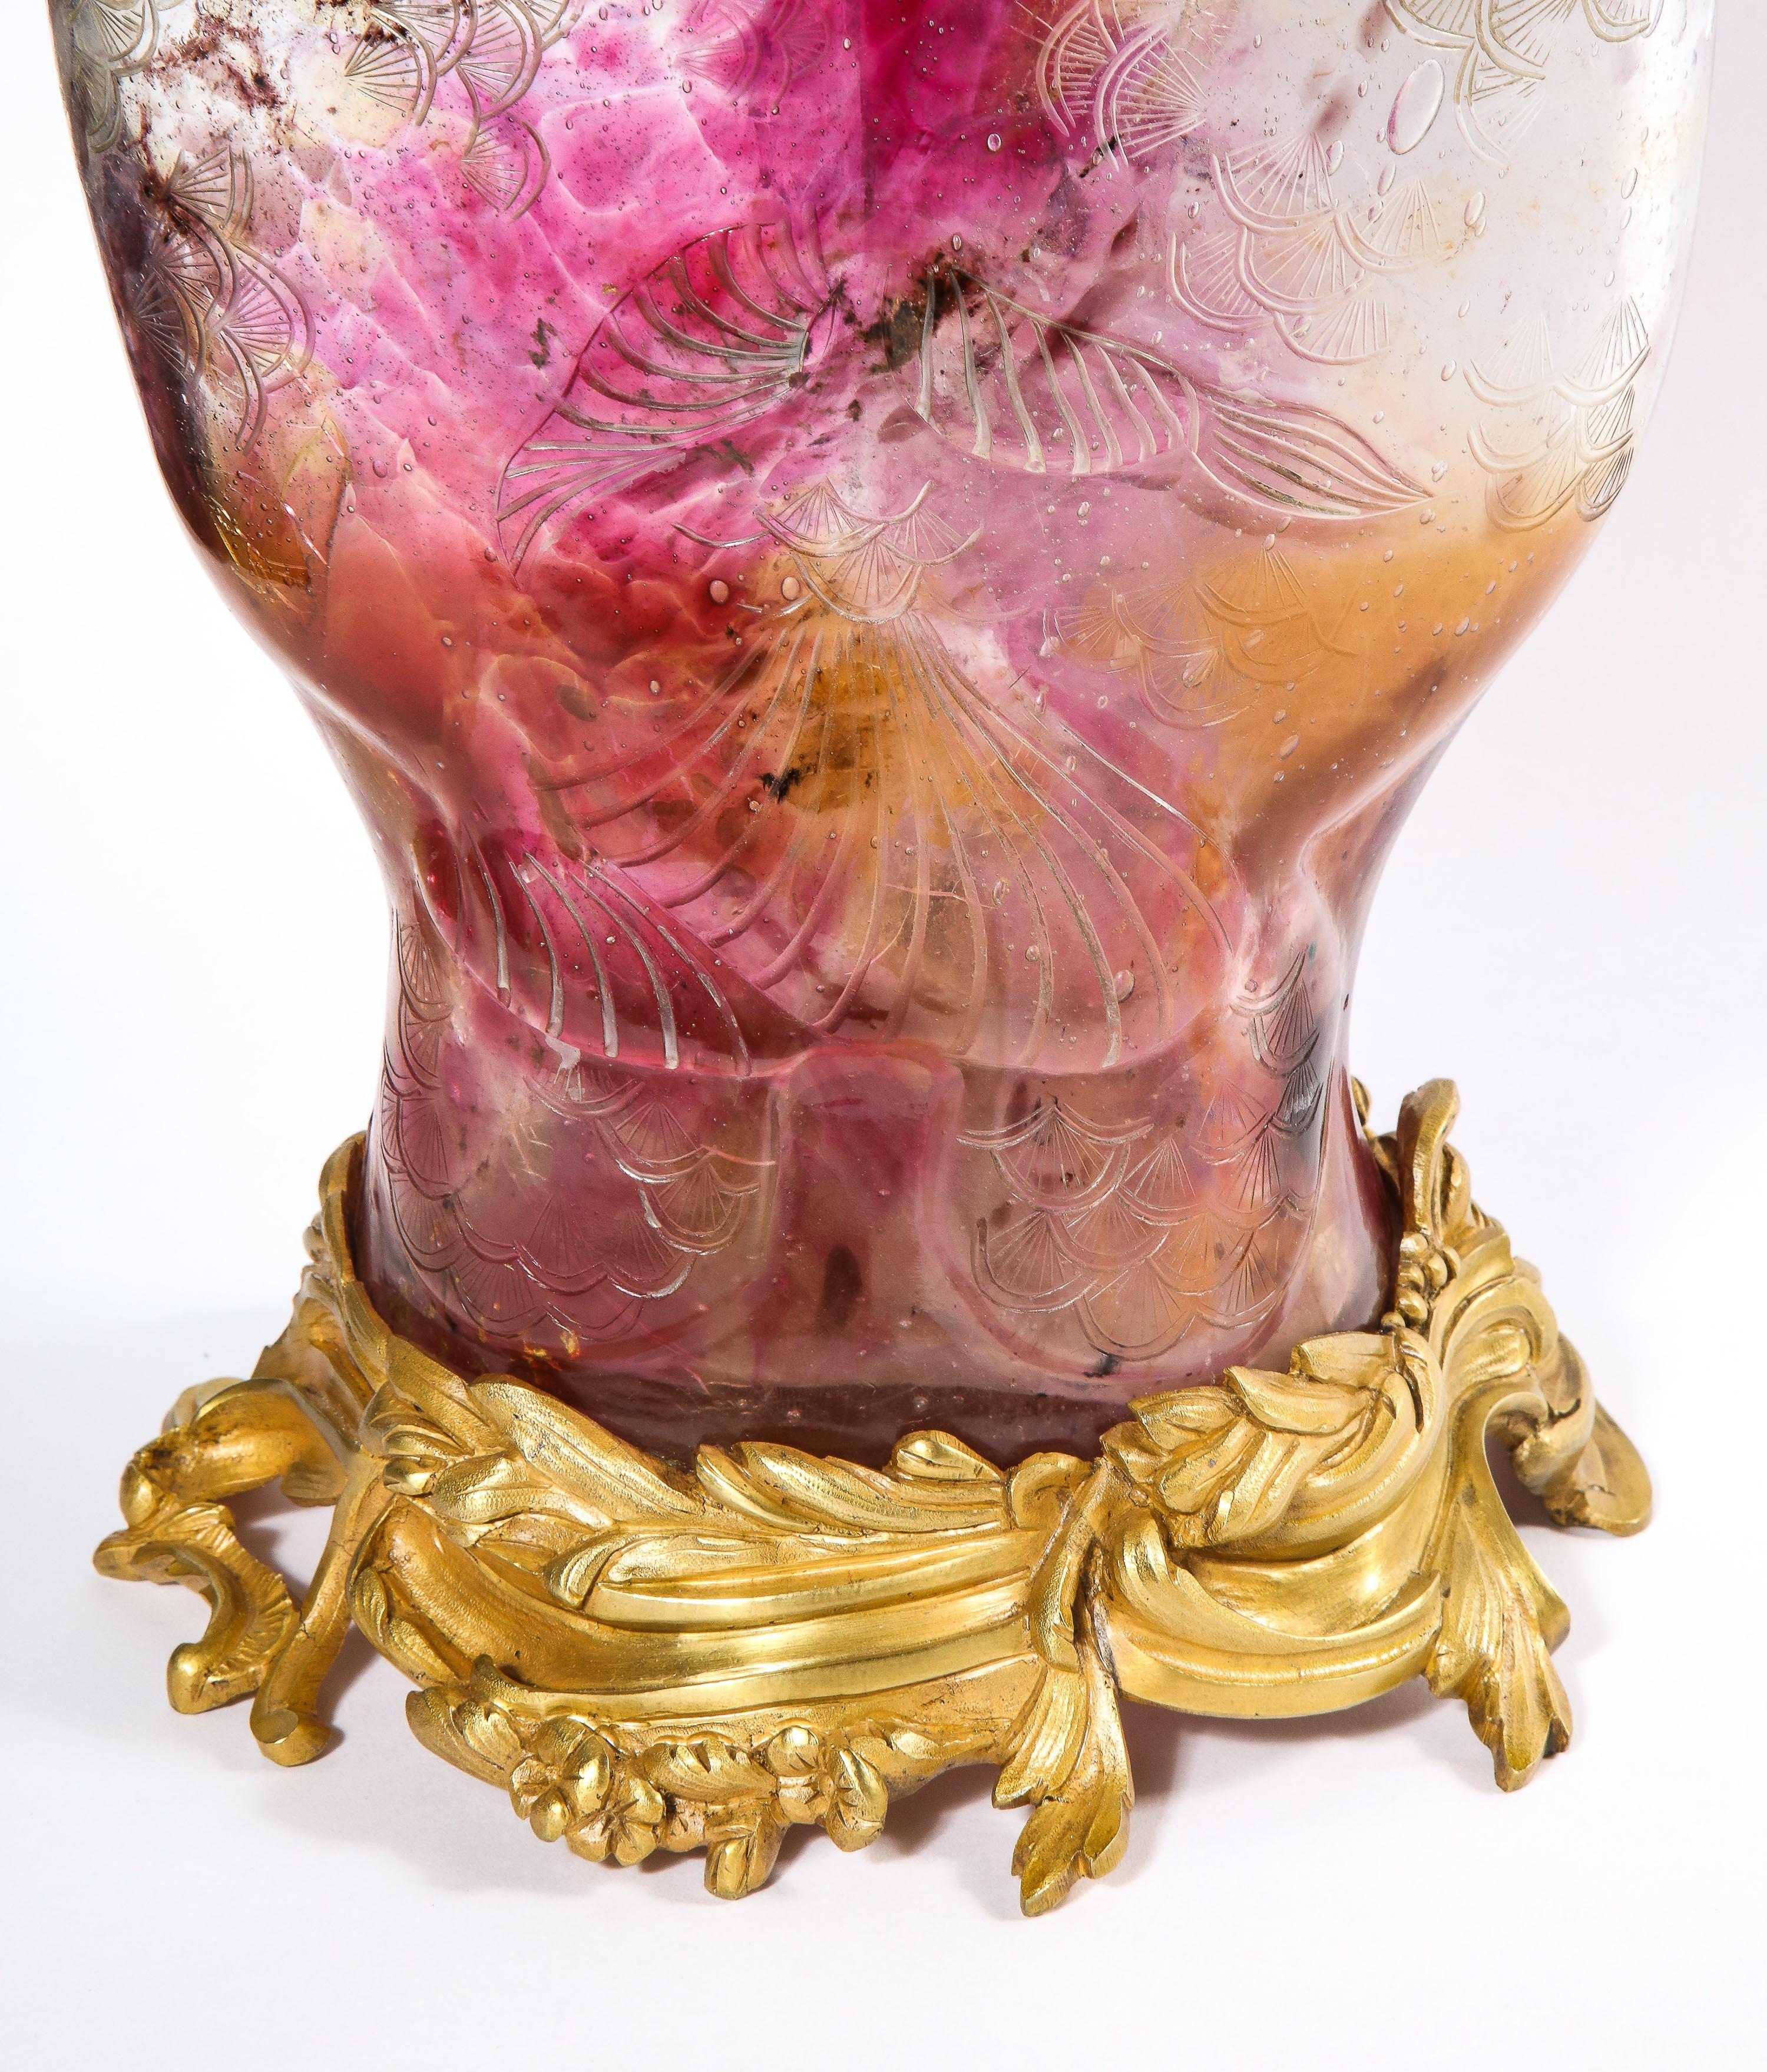 French Emile Galle, A Rare & Important Ormolu-Mounted Double Carp Fish Pink-Glass Vase For Sale